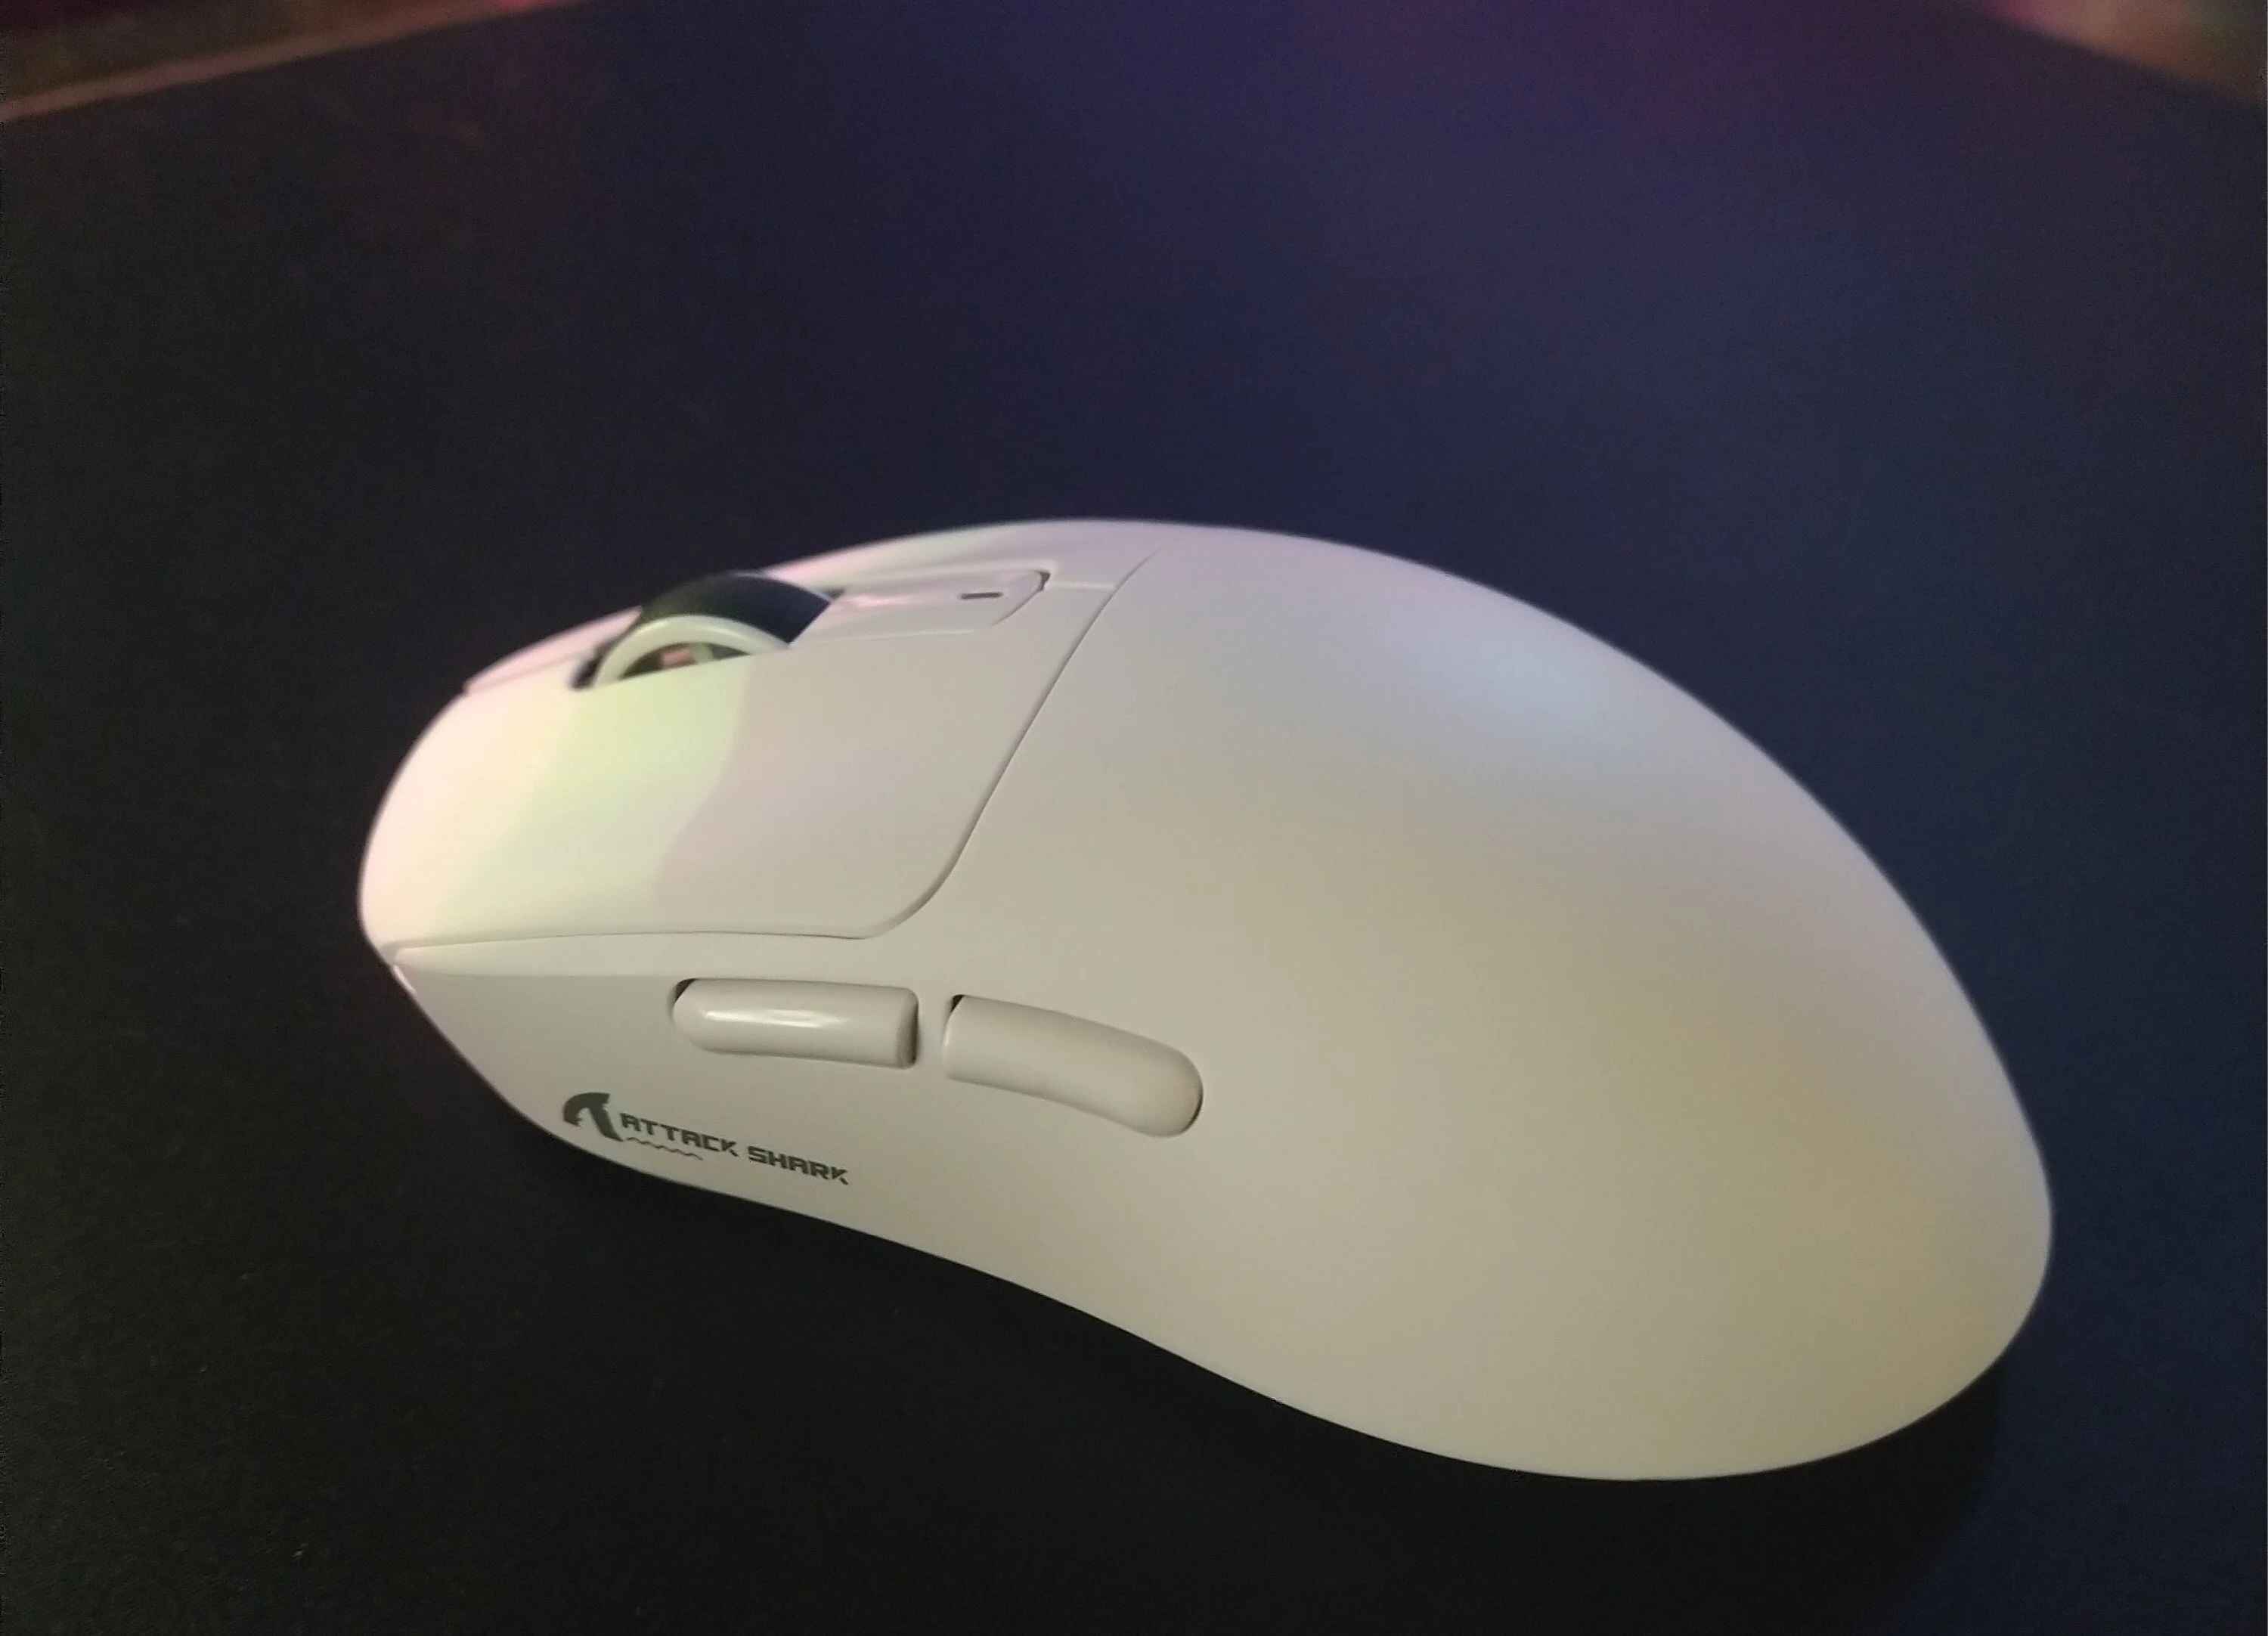 how-to-pair-the-shark-gaming-mouse